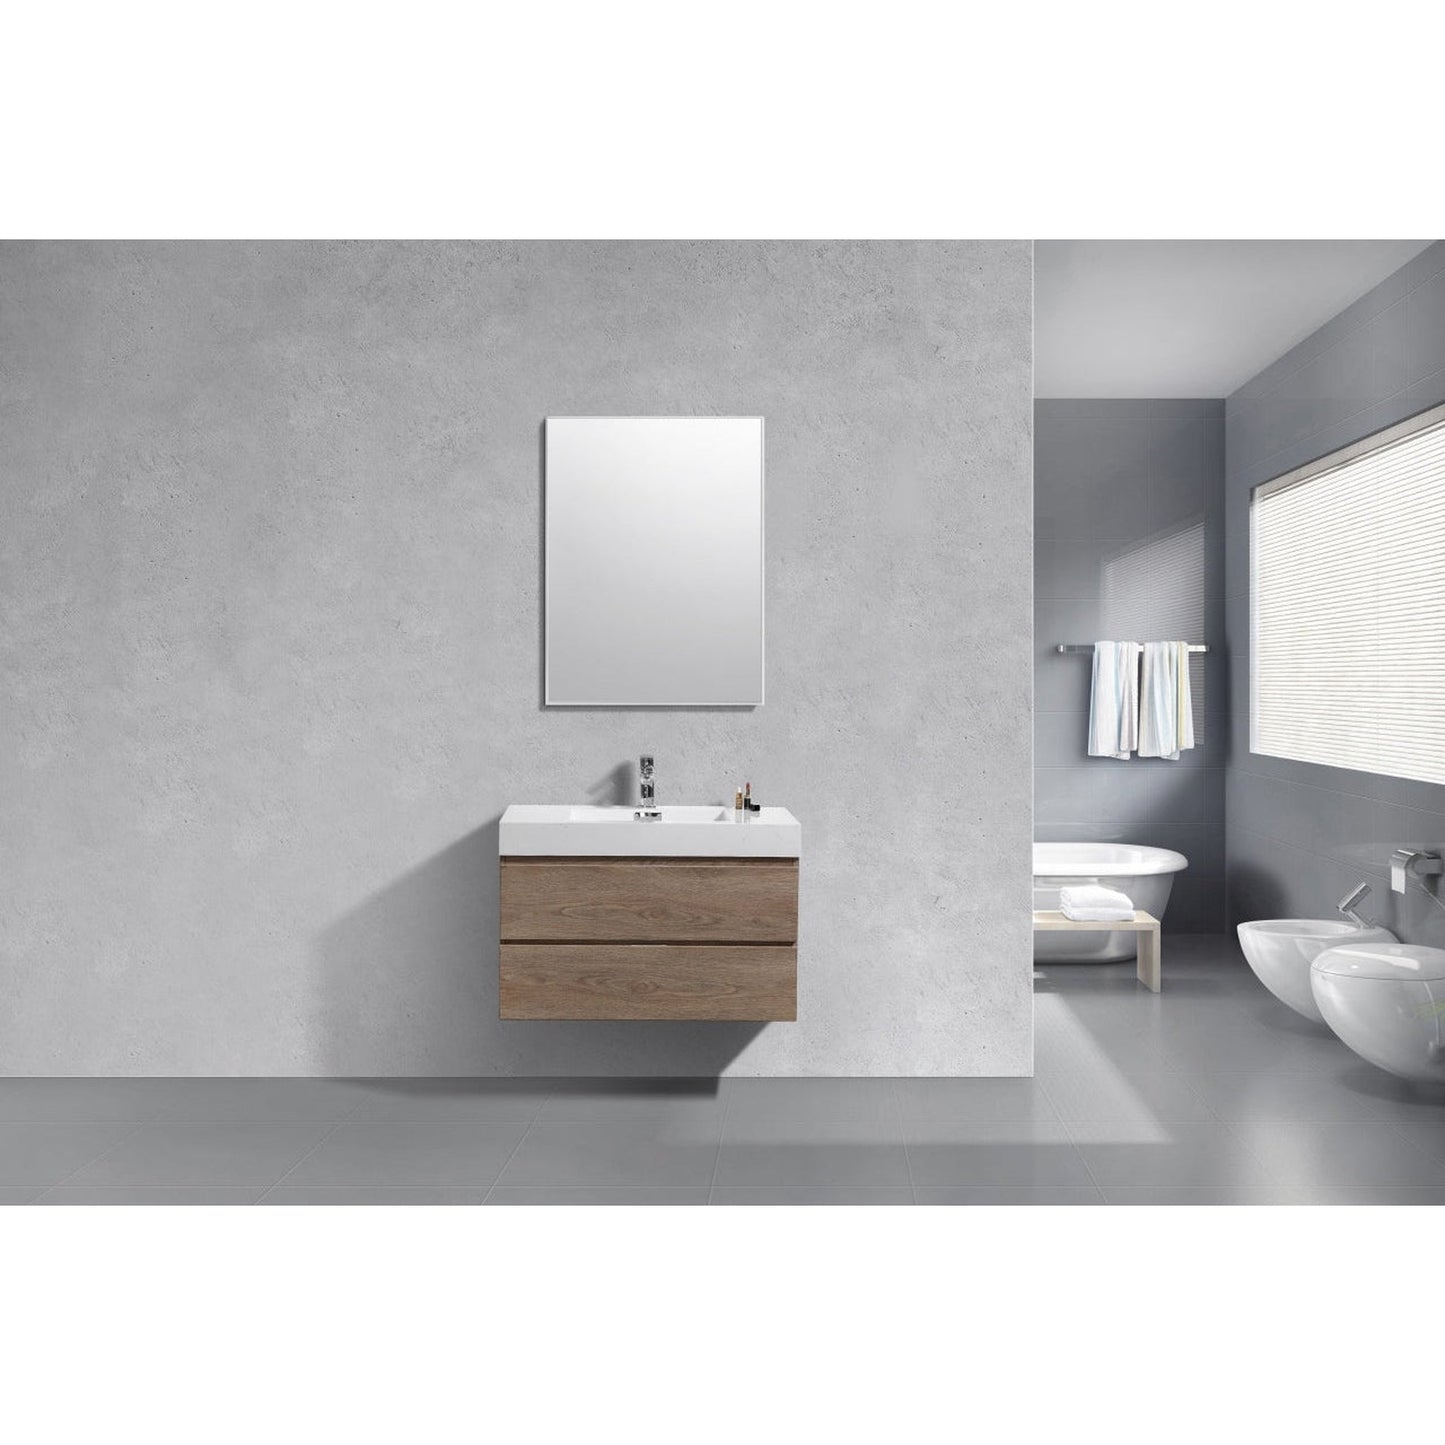 KubeBath Bliss 36" Butternut Wall-Mounted Modern Bathroom Vanity With Single Integrated Acrylic Sink With Overflow and 30" Butternut Framed Mirror With Shelf